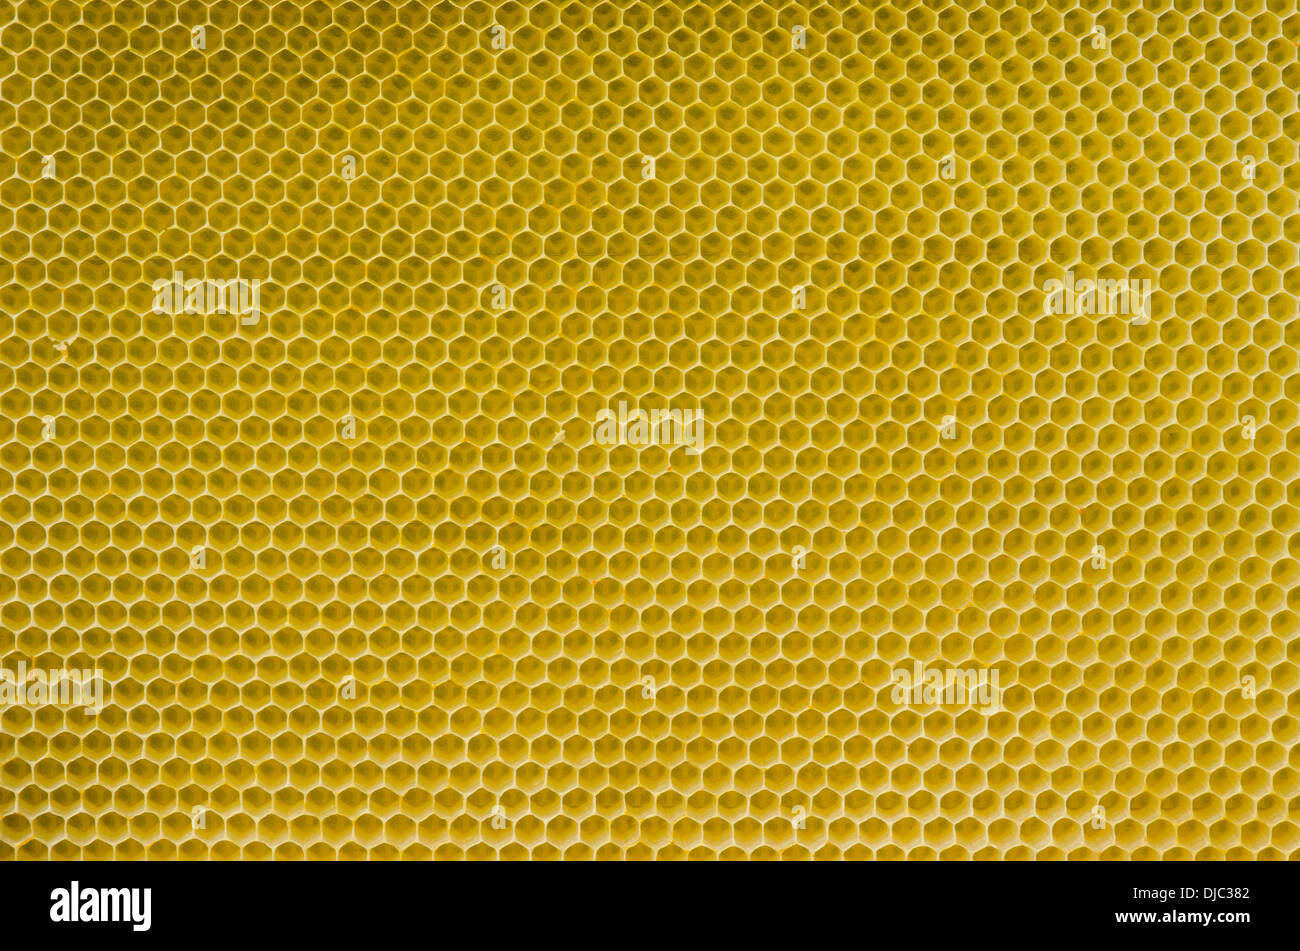 Honeycomb pattern with yellow empty cells in daylight Stock Photo